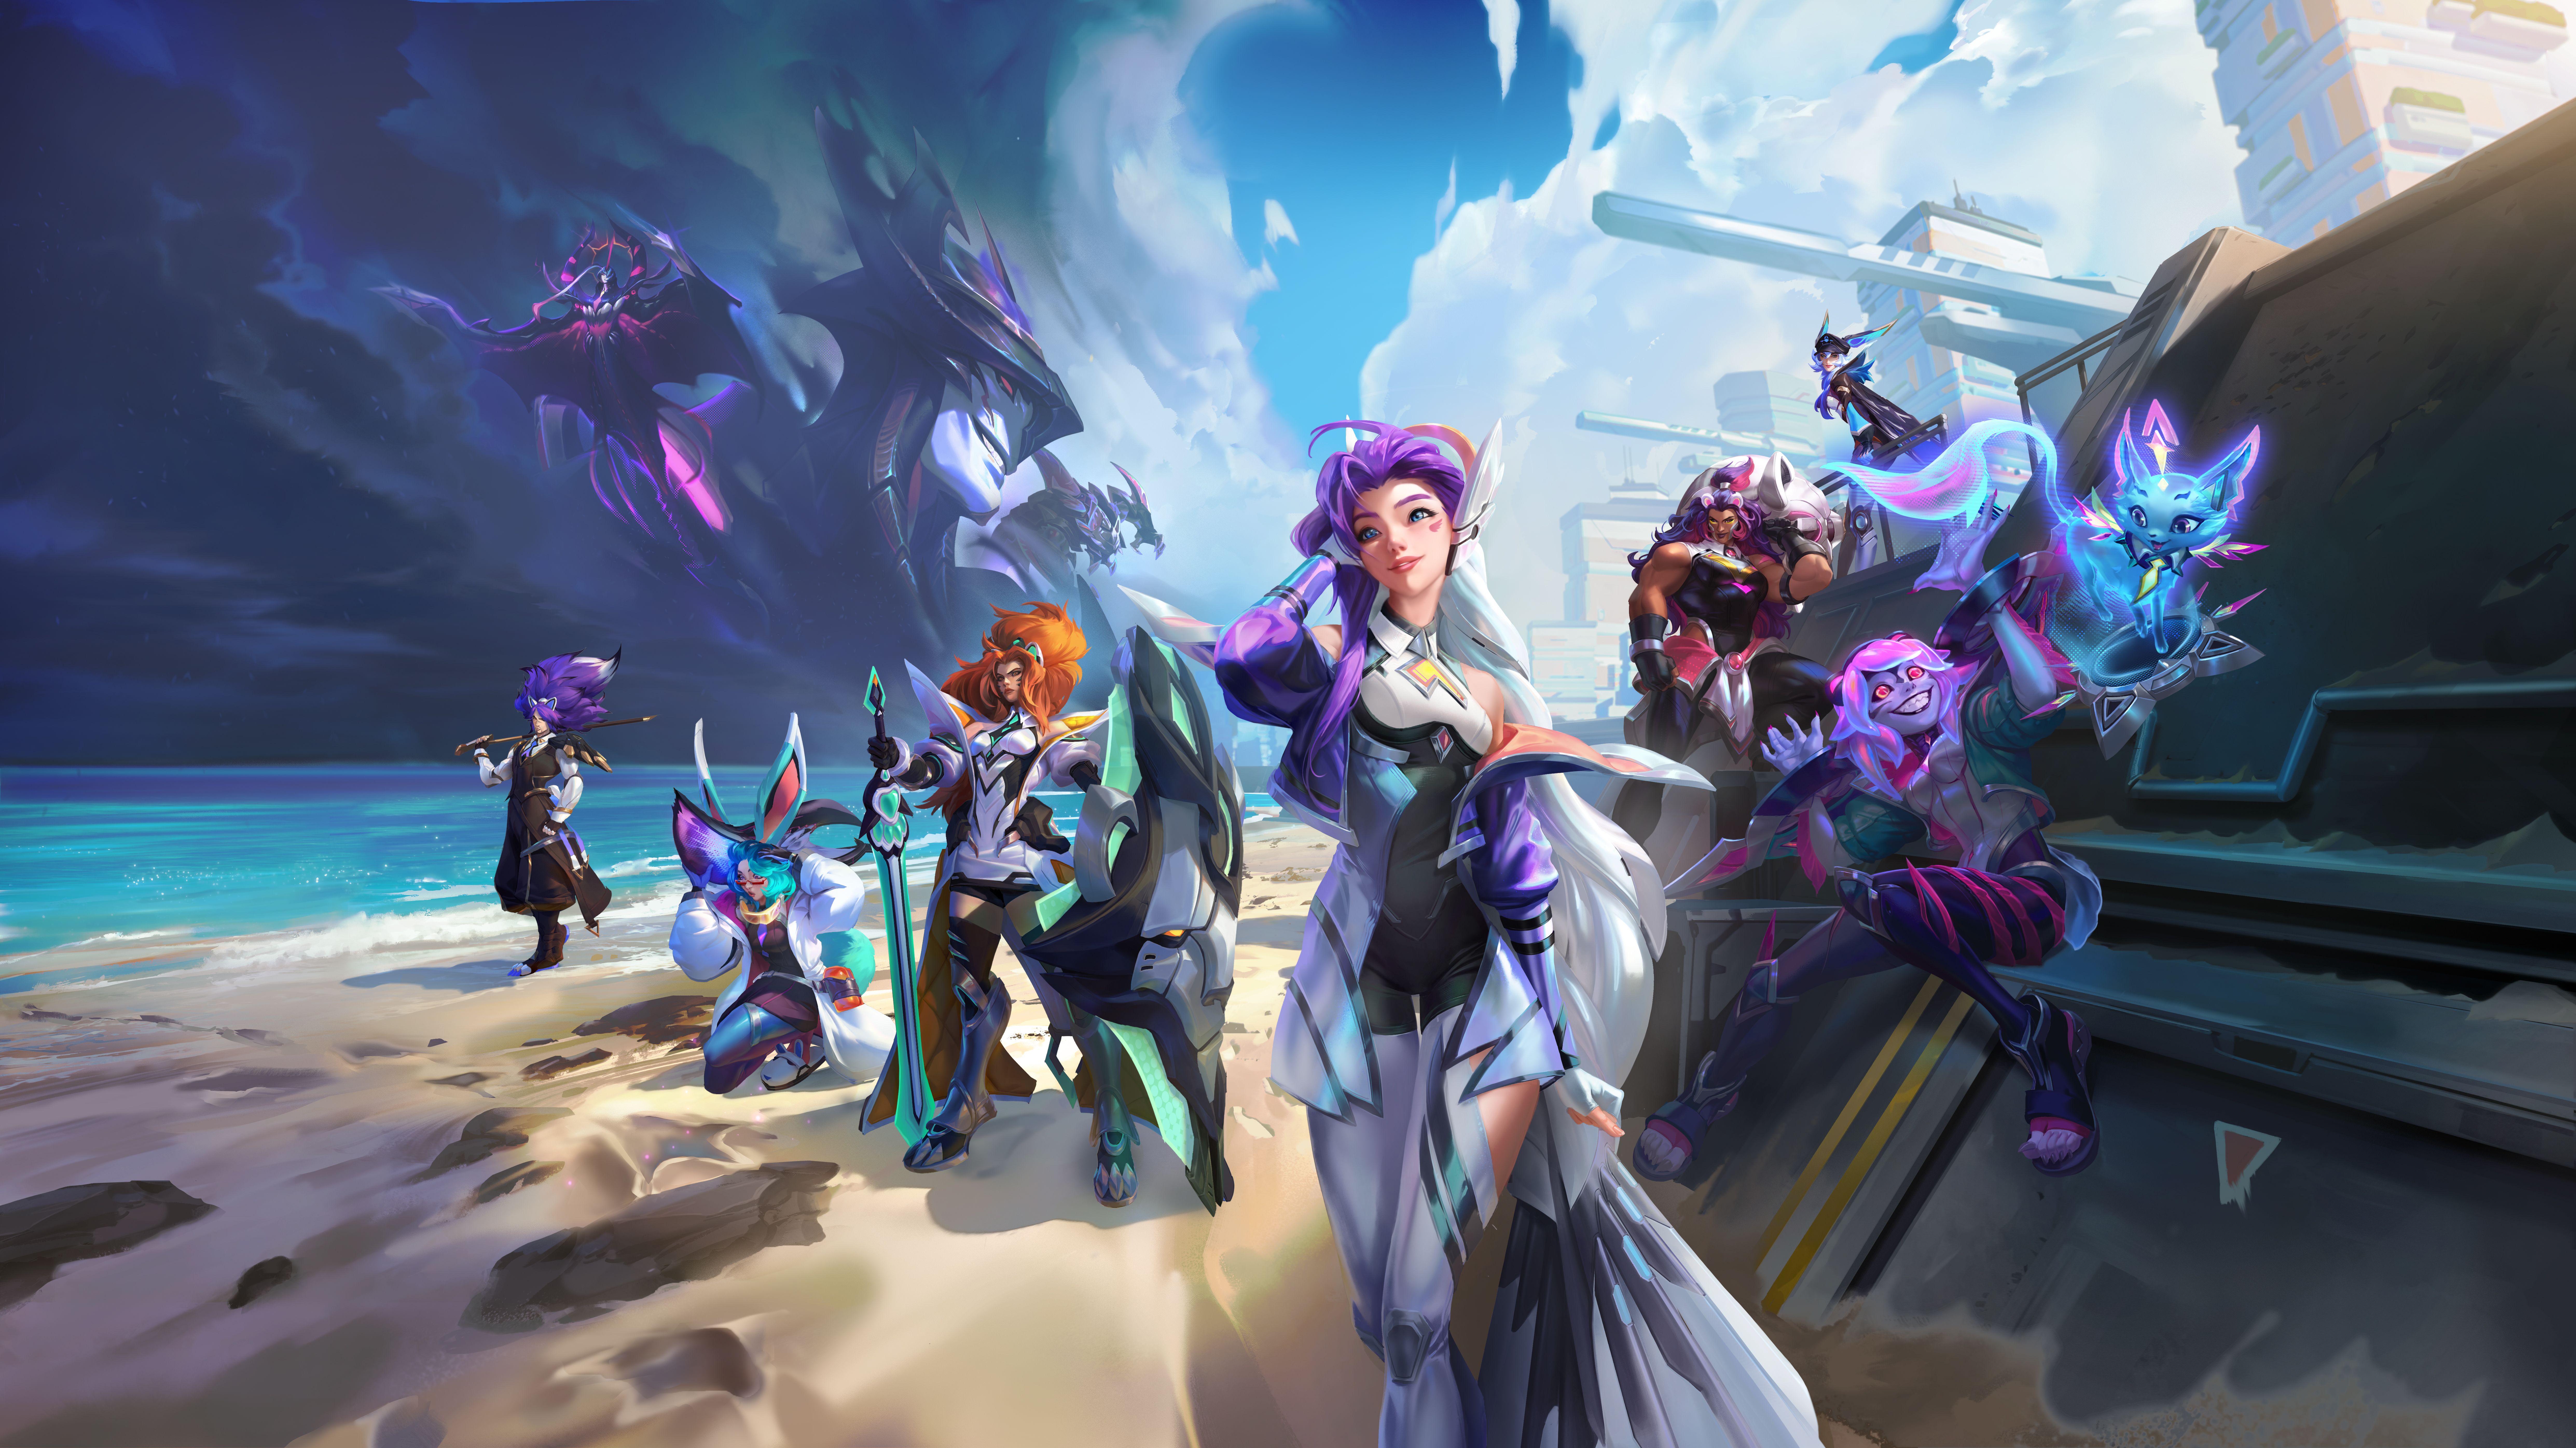 Key art for Anima Squad 2024 in League of Legends, showing Seraphine, Illaoi, Yuumi, Aurora, Briar, Xayah, Yasuo and Leona standing on a beach. In the distance, the Primordials threaten, with an ominous cloud in the shape of Primordial Aatrox approaching